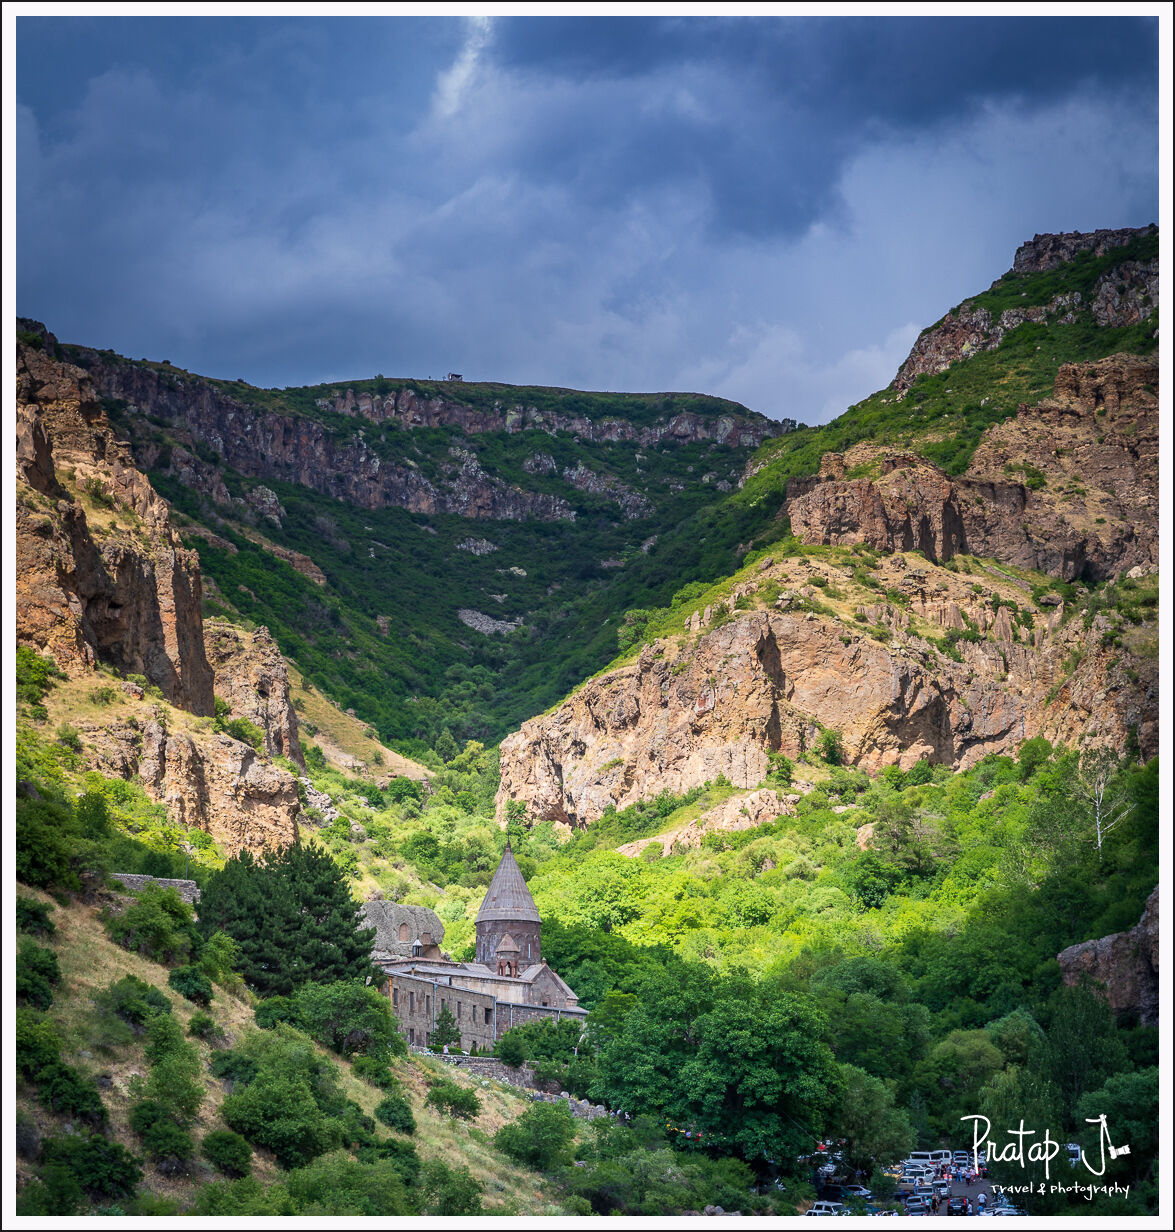 A view of geghard monastery in between mountains